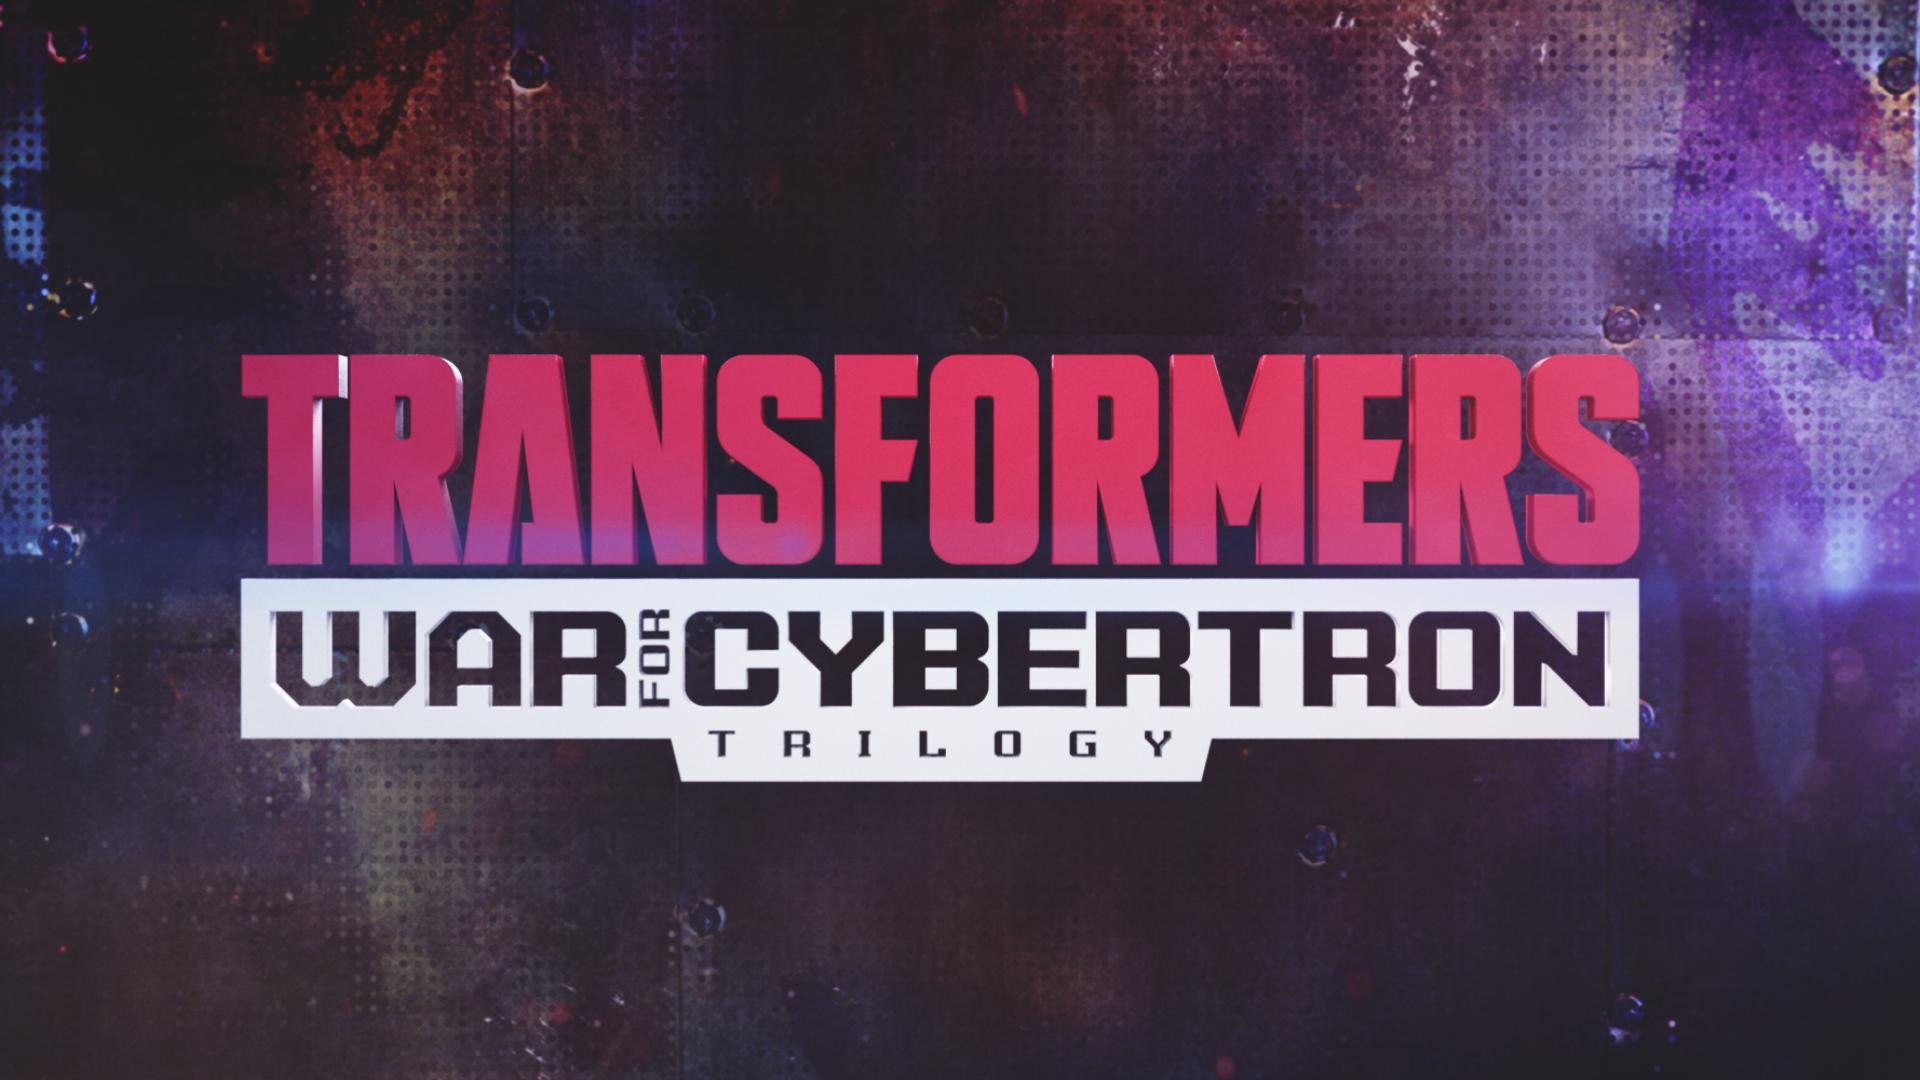 War For Cybertron Trilogy Tie In Cartoon Announced For Netflix!